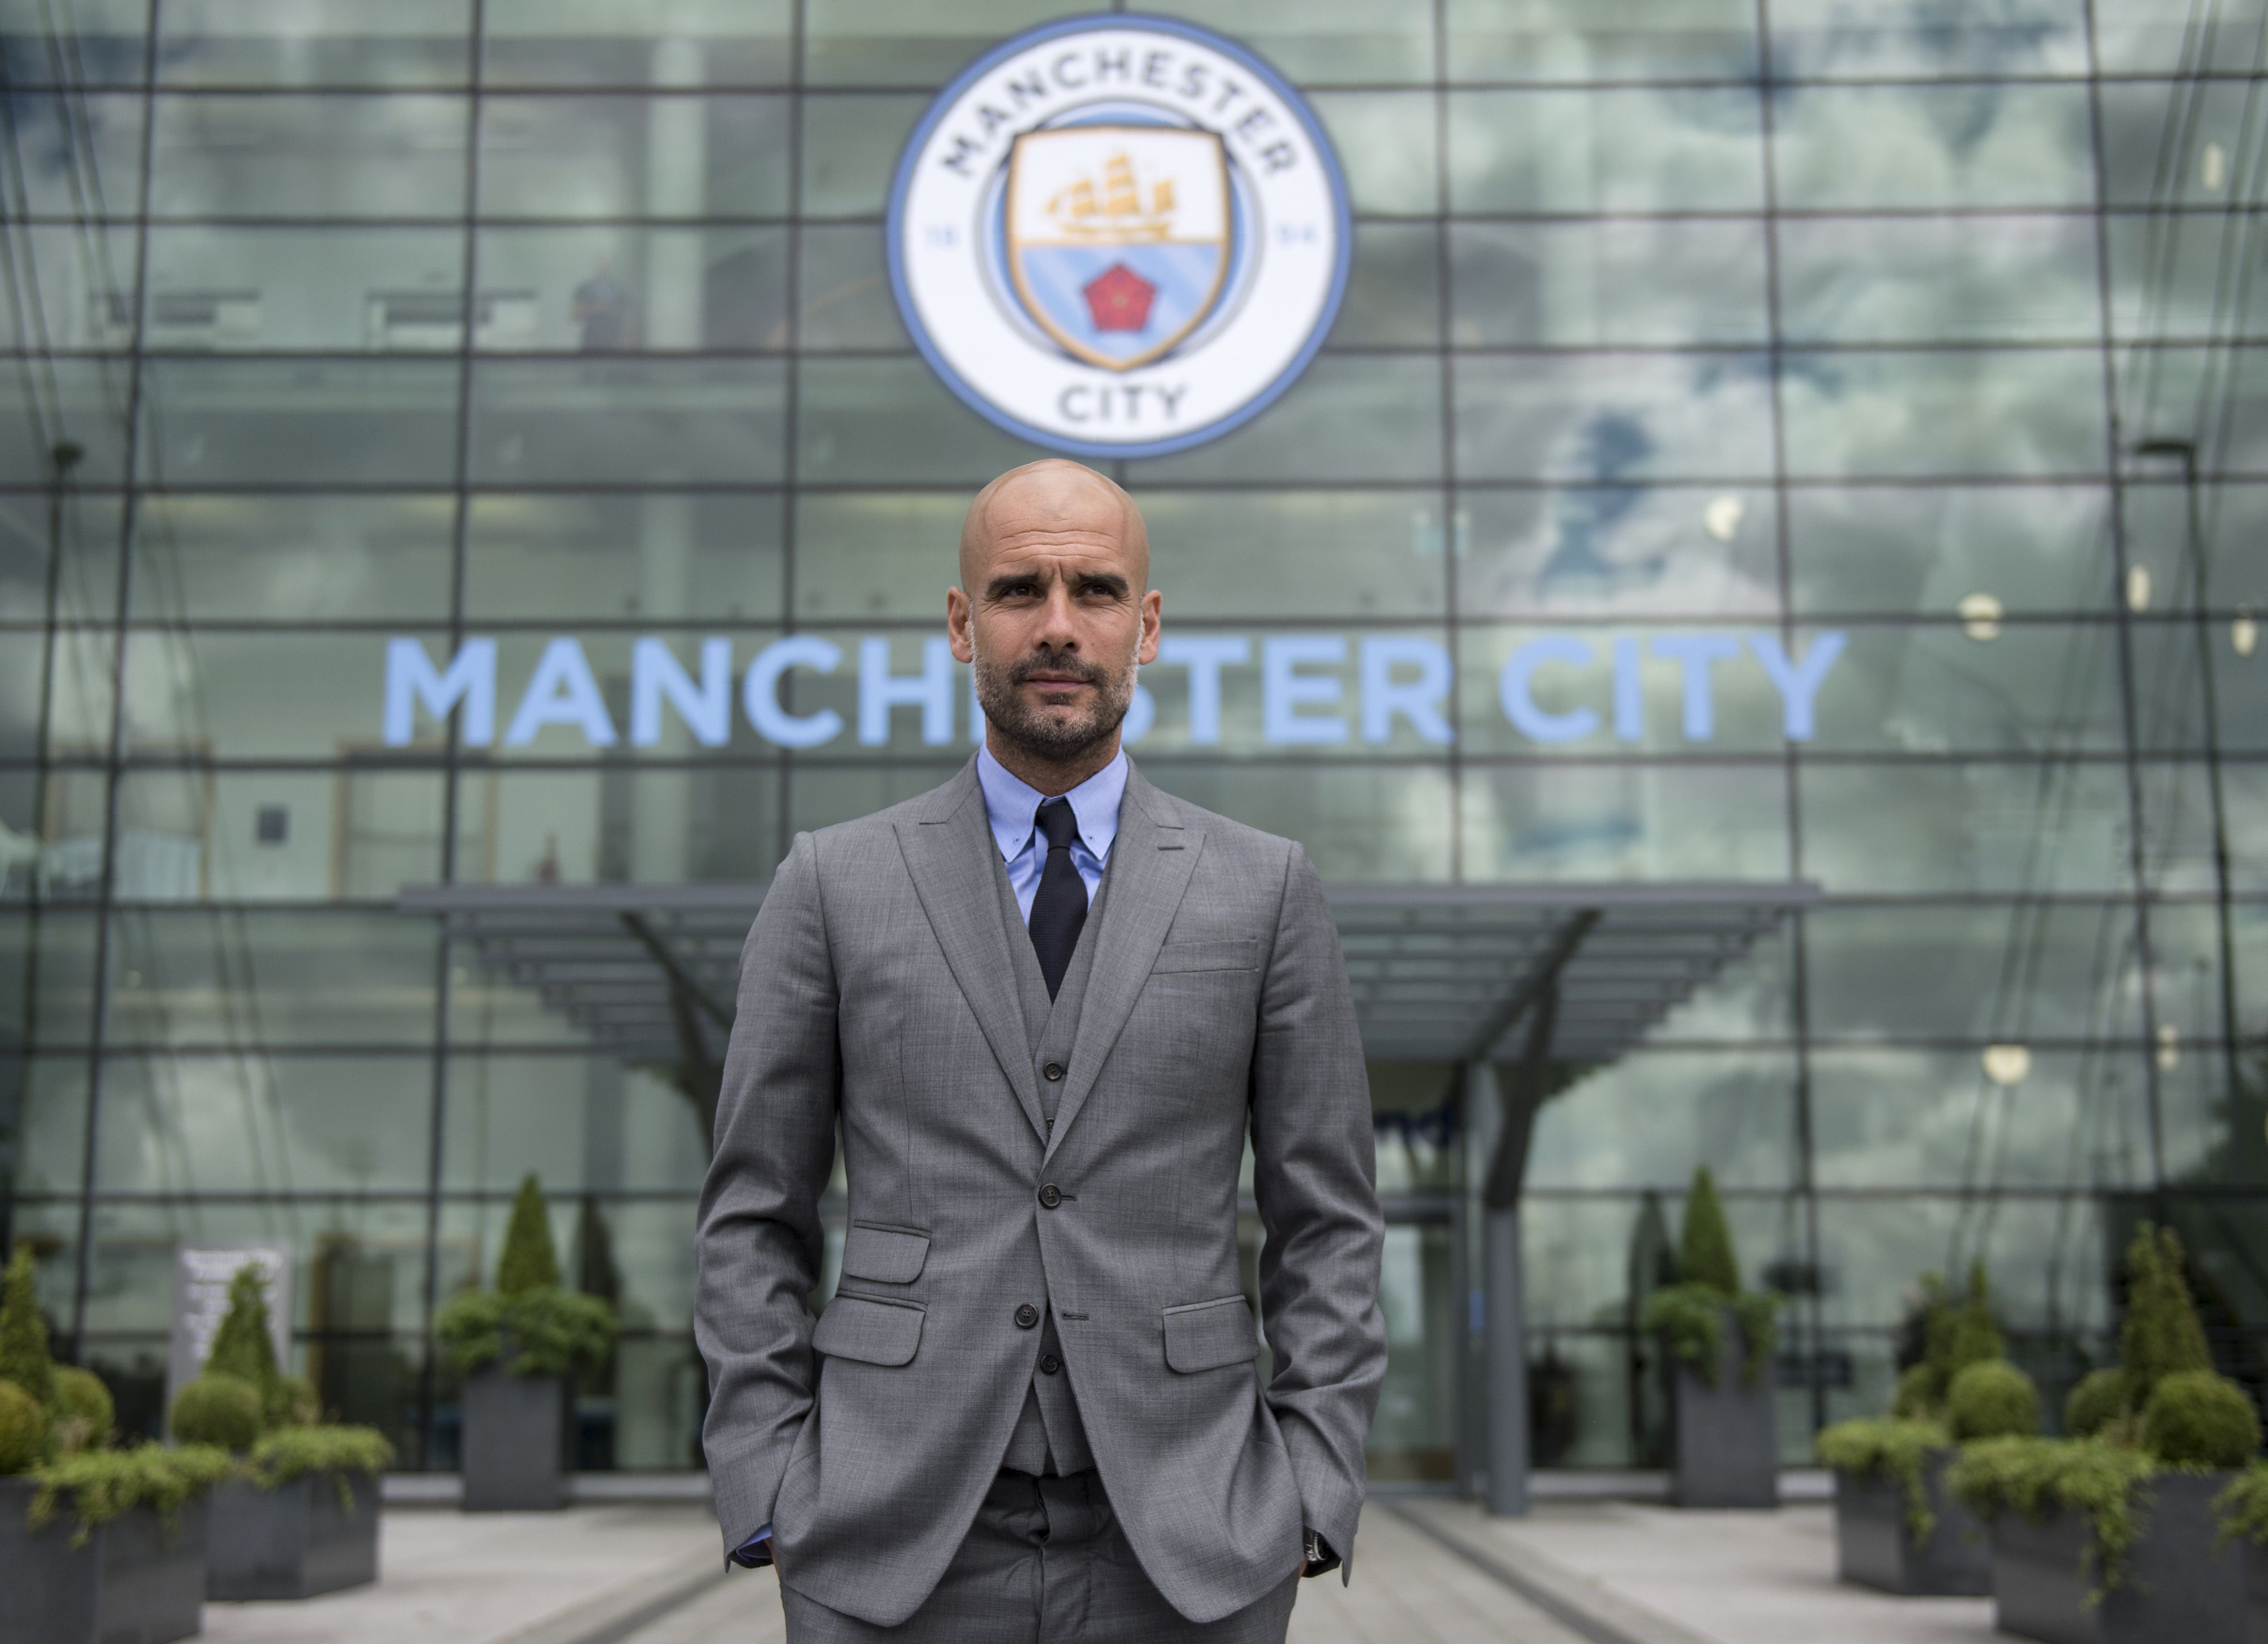 manchester city 039 s spanish football coach pep guardiola poses for pictures outside the etihad stadium in manchester northern england on july 8 2016 pep guardiola has warned his manchester city players that they have to prove themselves all over again following his arrival at the club photo afp